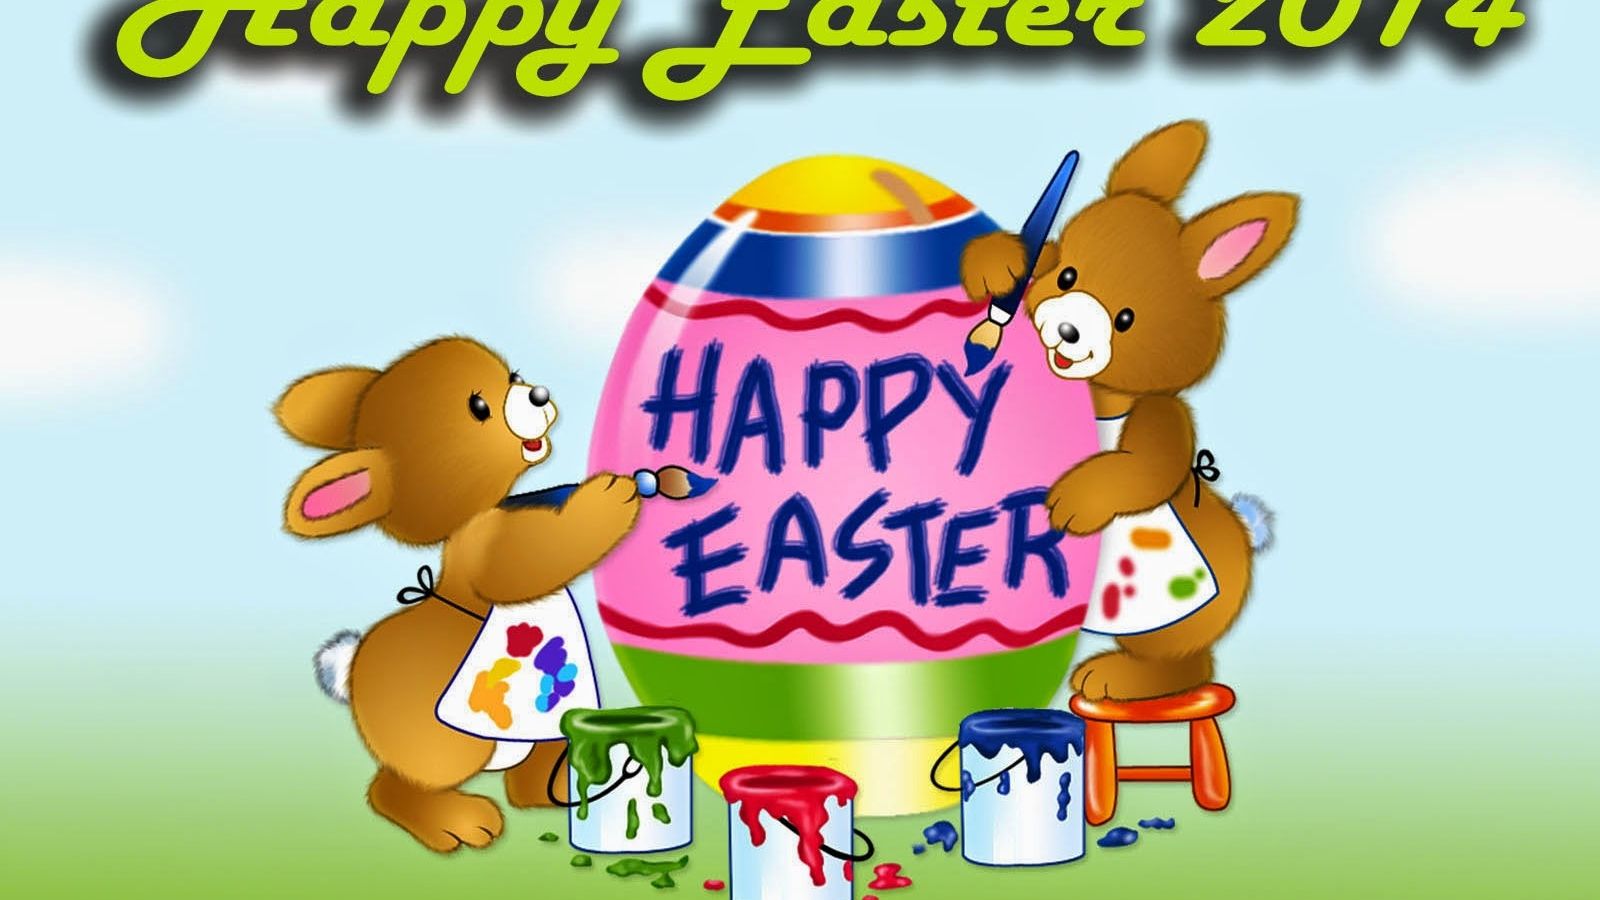 Free download File Name easter mickey mouse wallpaper jpg